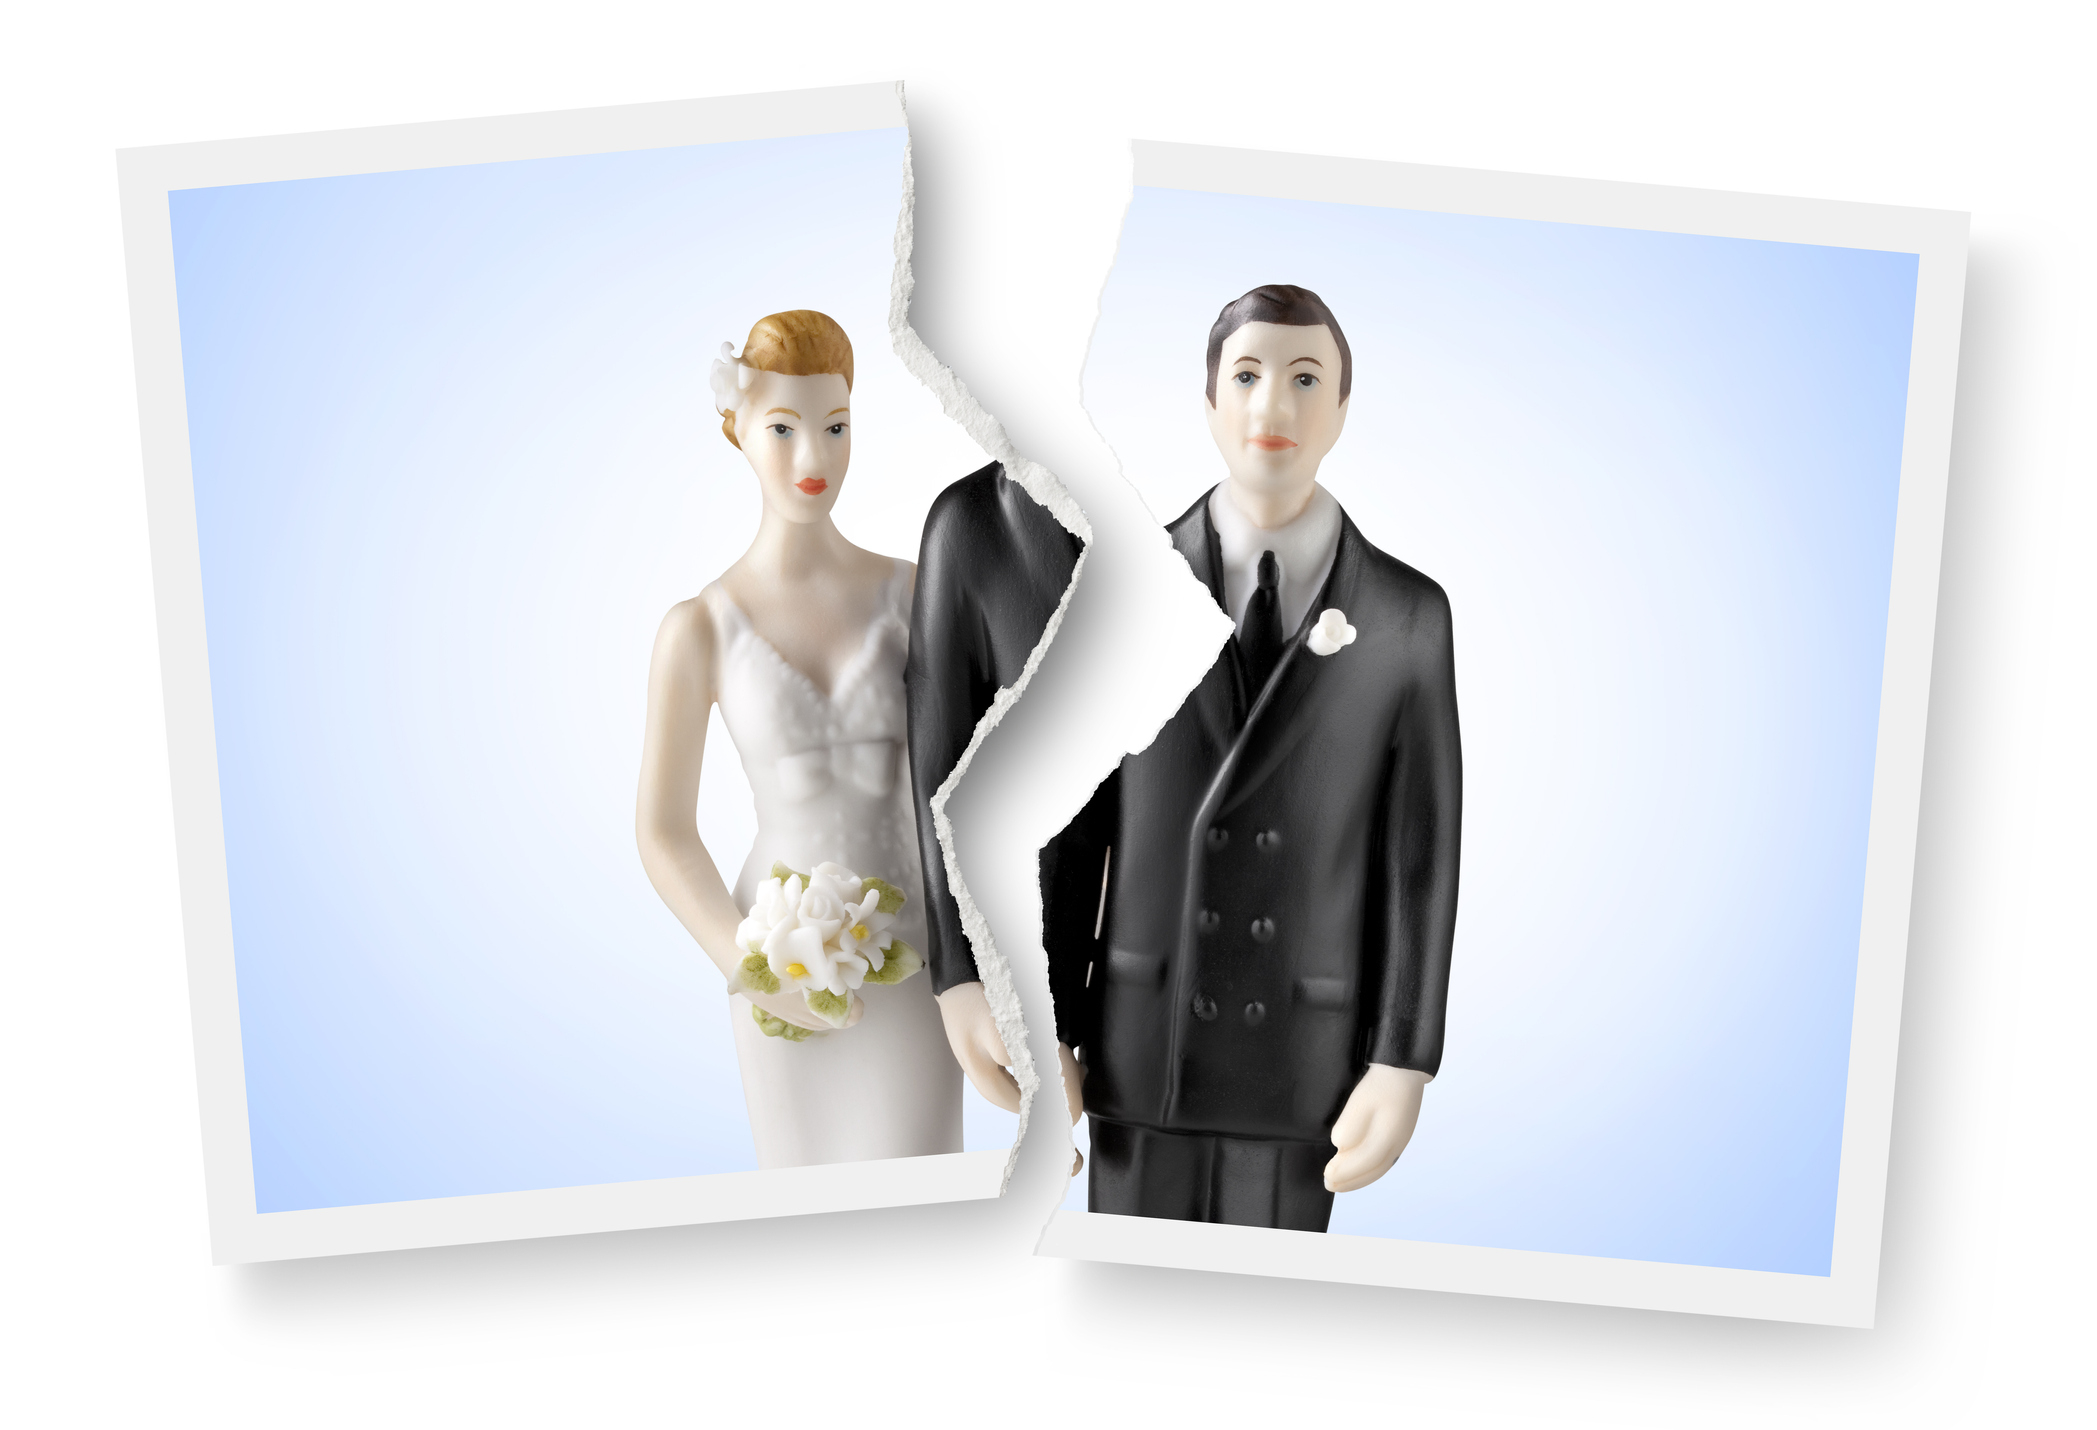 Torn photo of a bride and groom figurine, representing relationship end